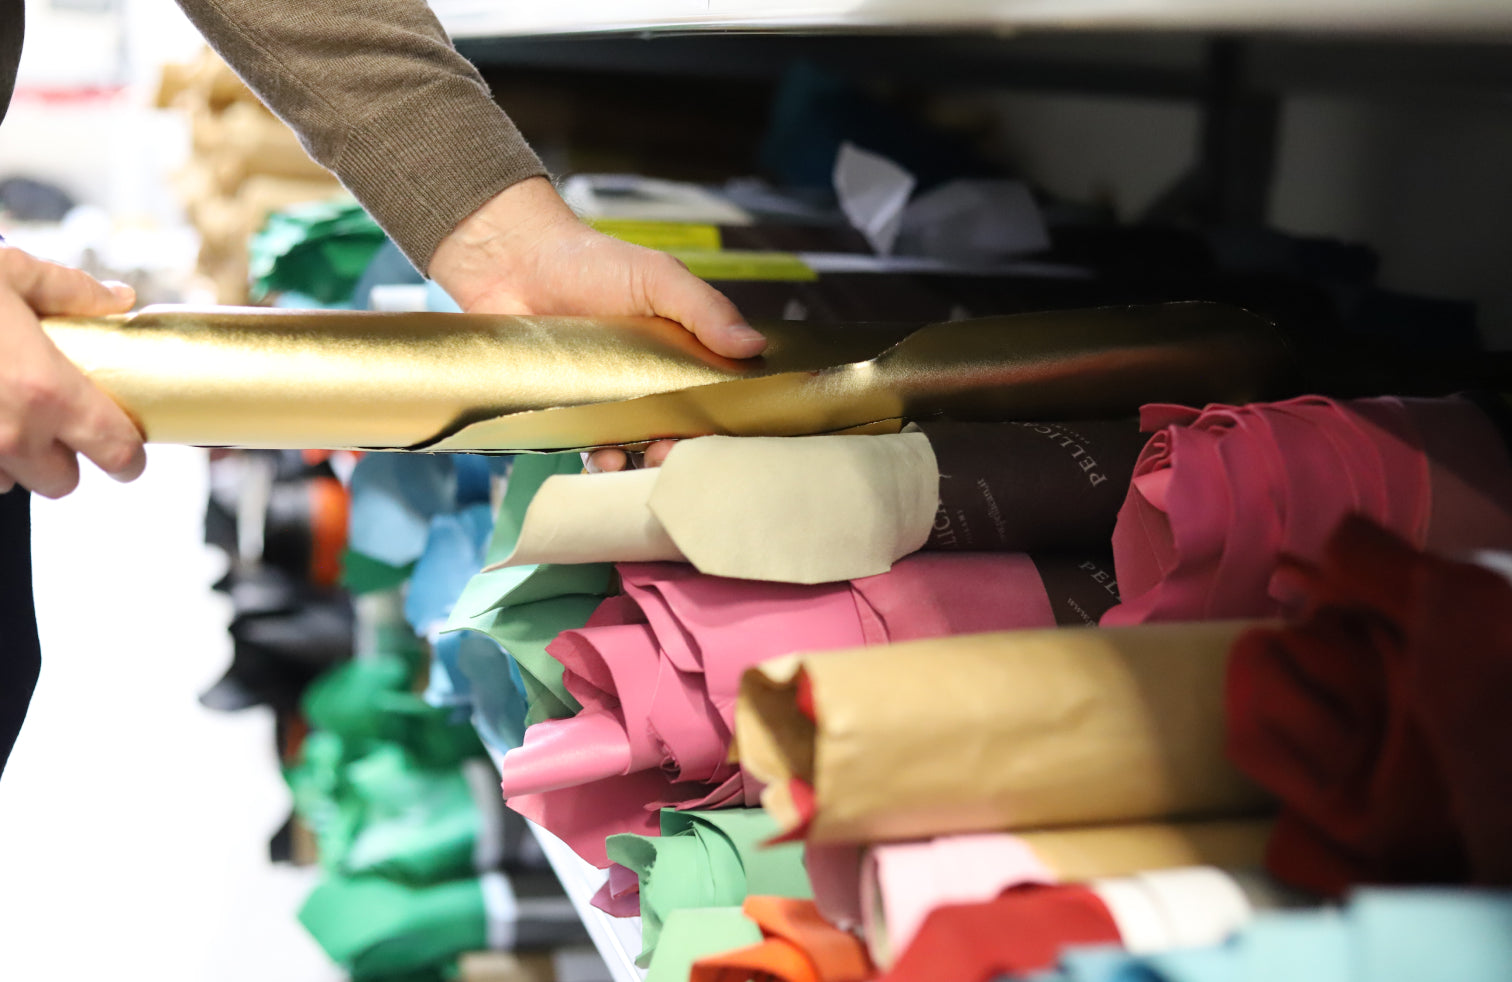 Selecting colourful leathers from a shelf of leathers. 